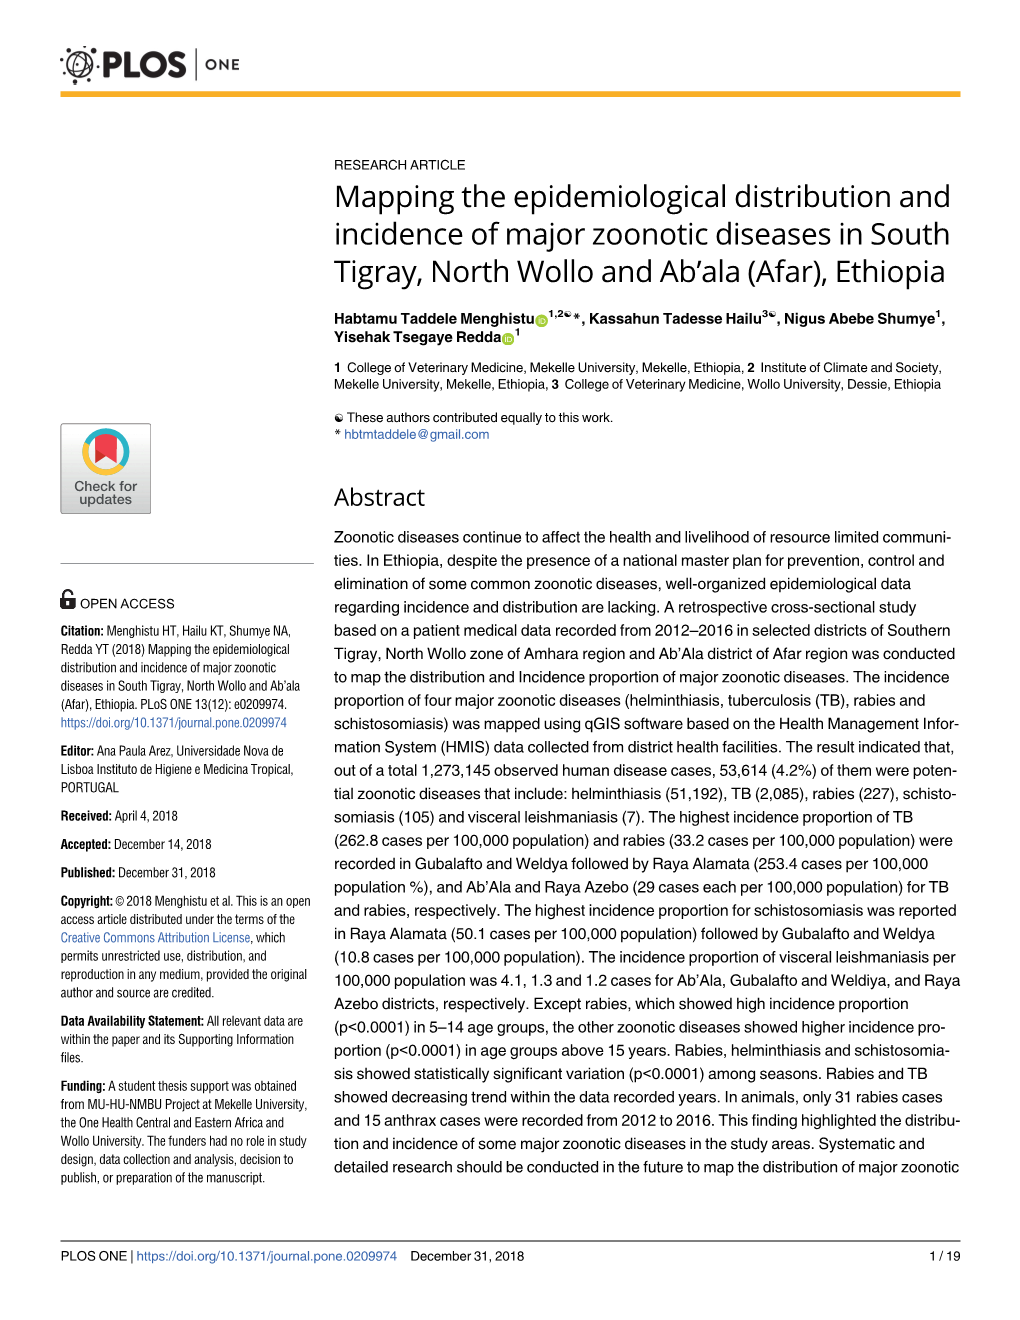 Mapping the Epidemiological Distribution and Incidence of Major Zoonotic Diseases in South Tigray, North Wollo and Ab'ala (Afar), Ethiopia